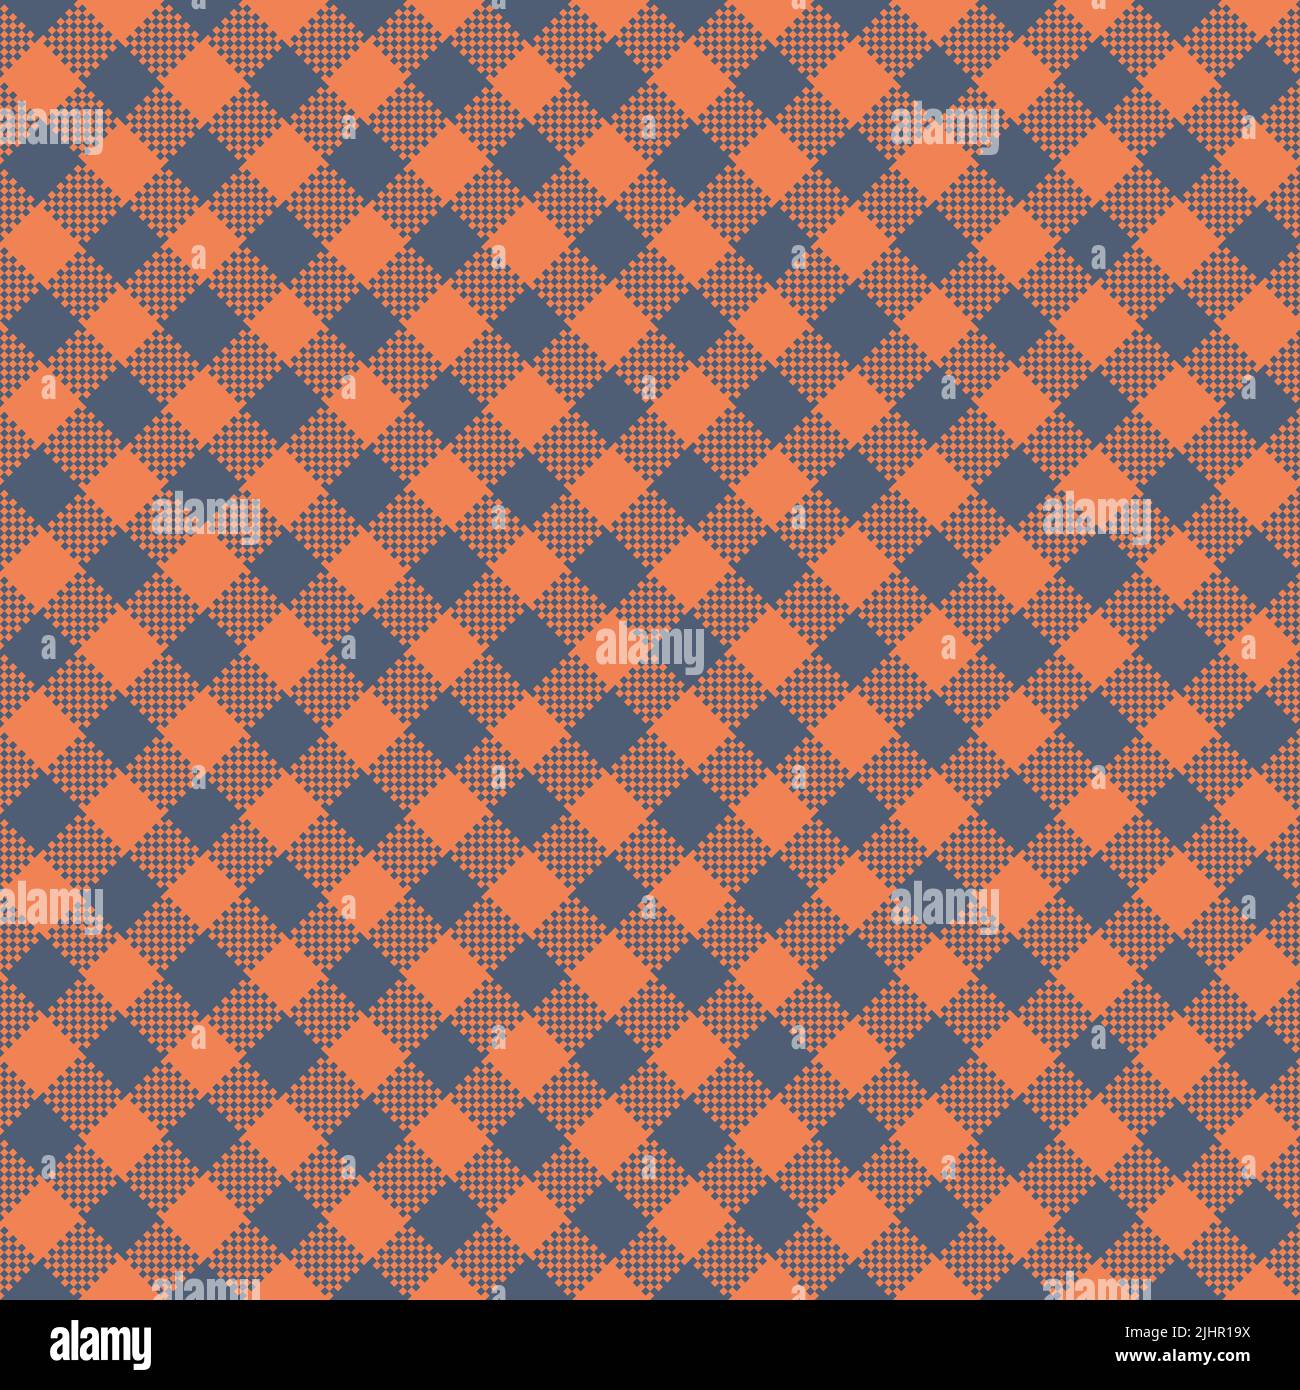 and Alamy pattern photography stock plaid images hi-res - Coral background